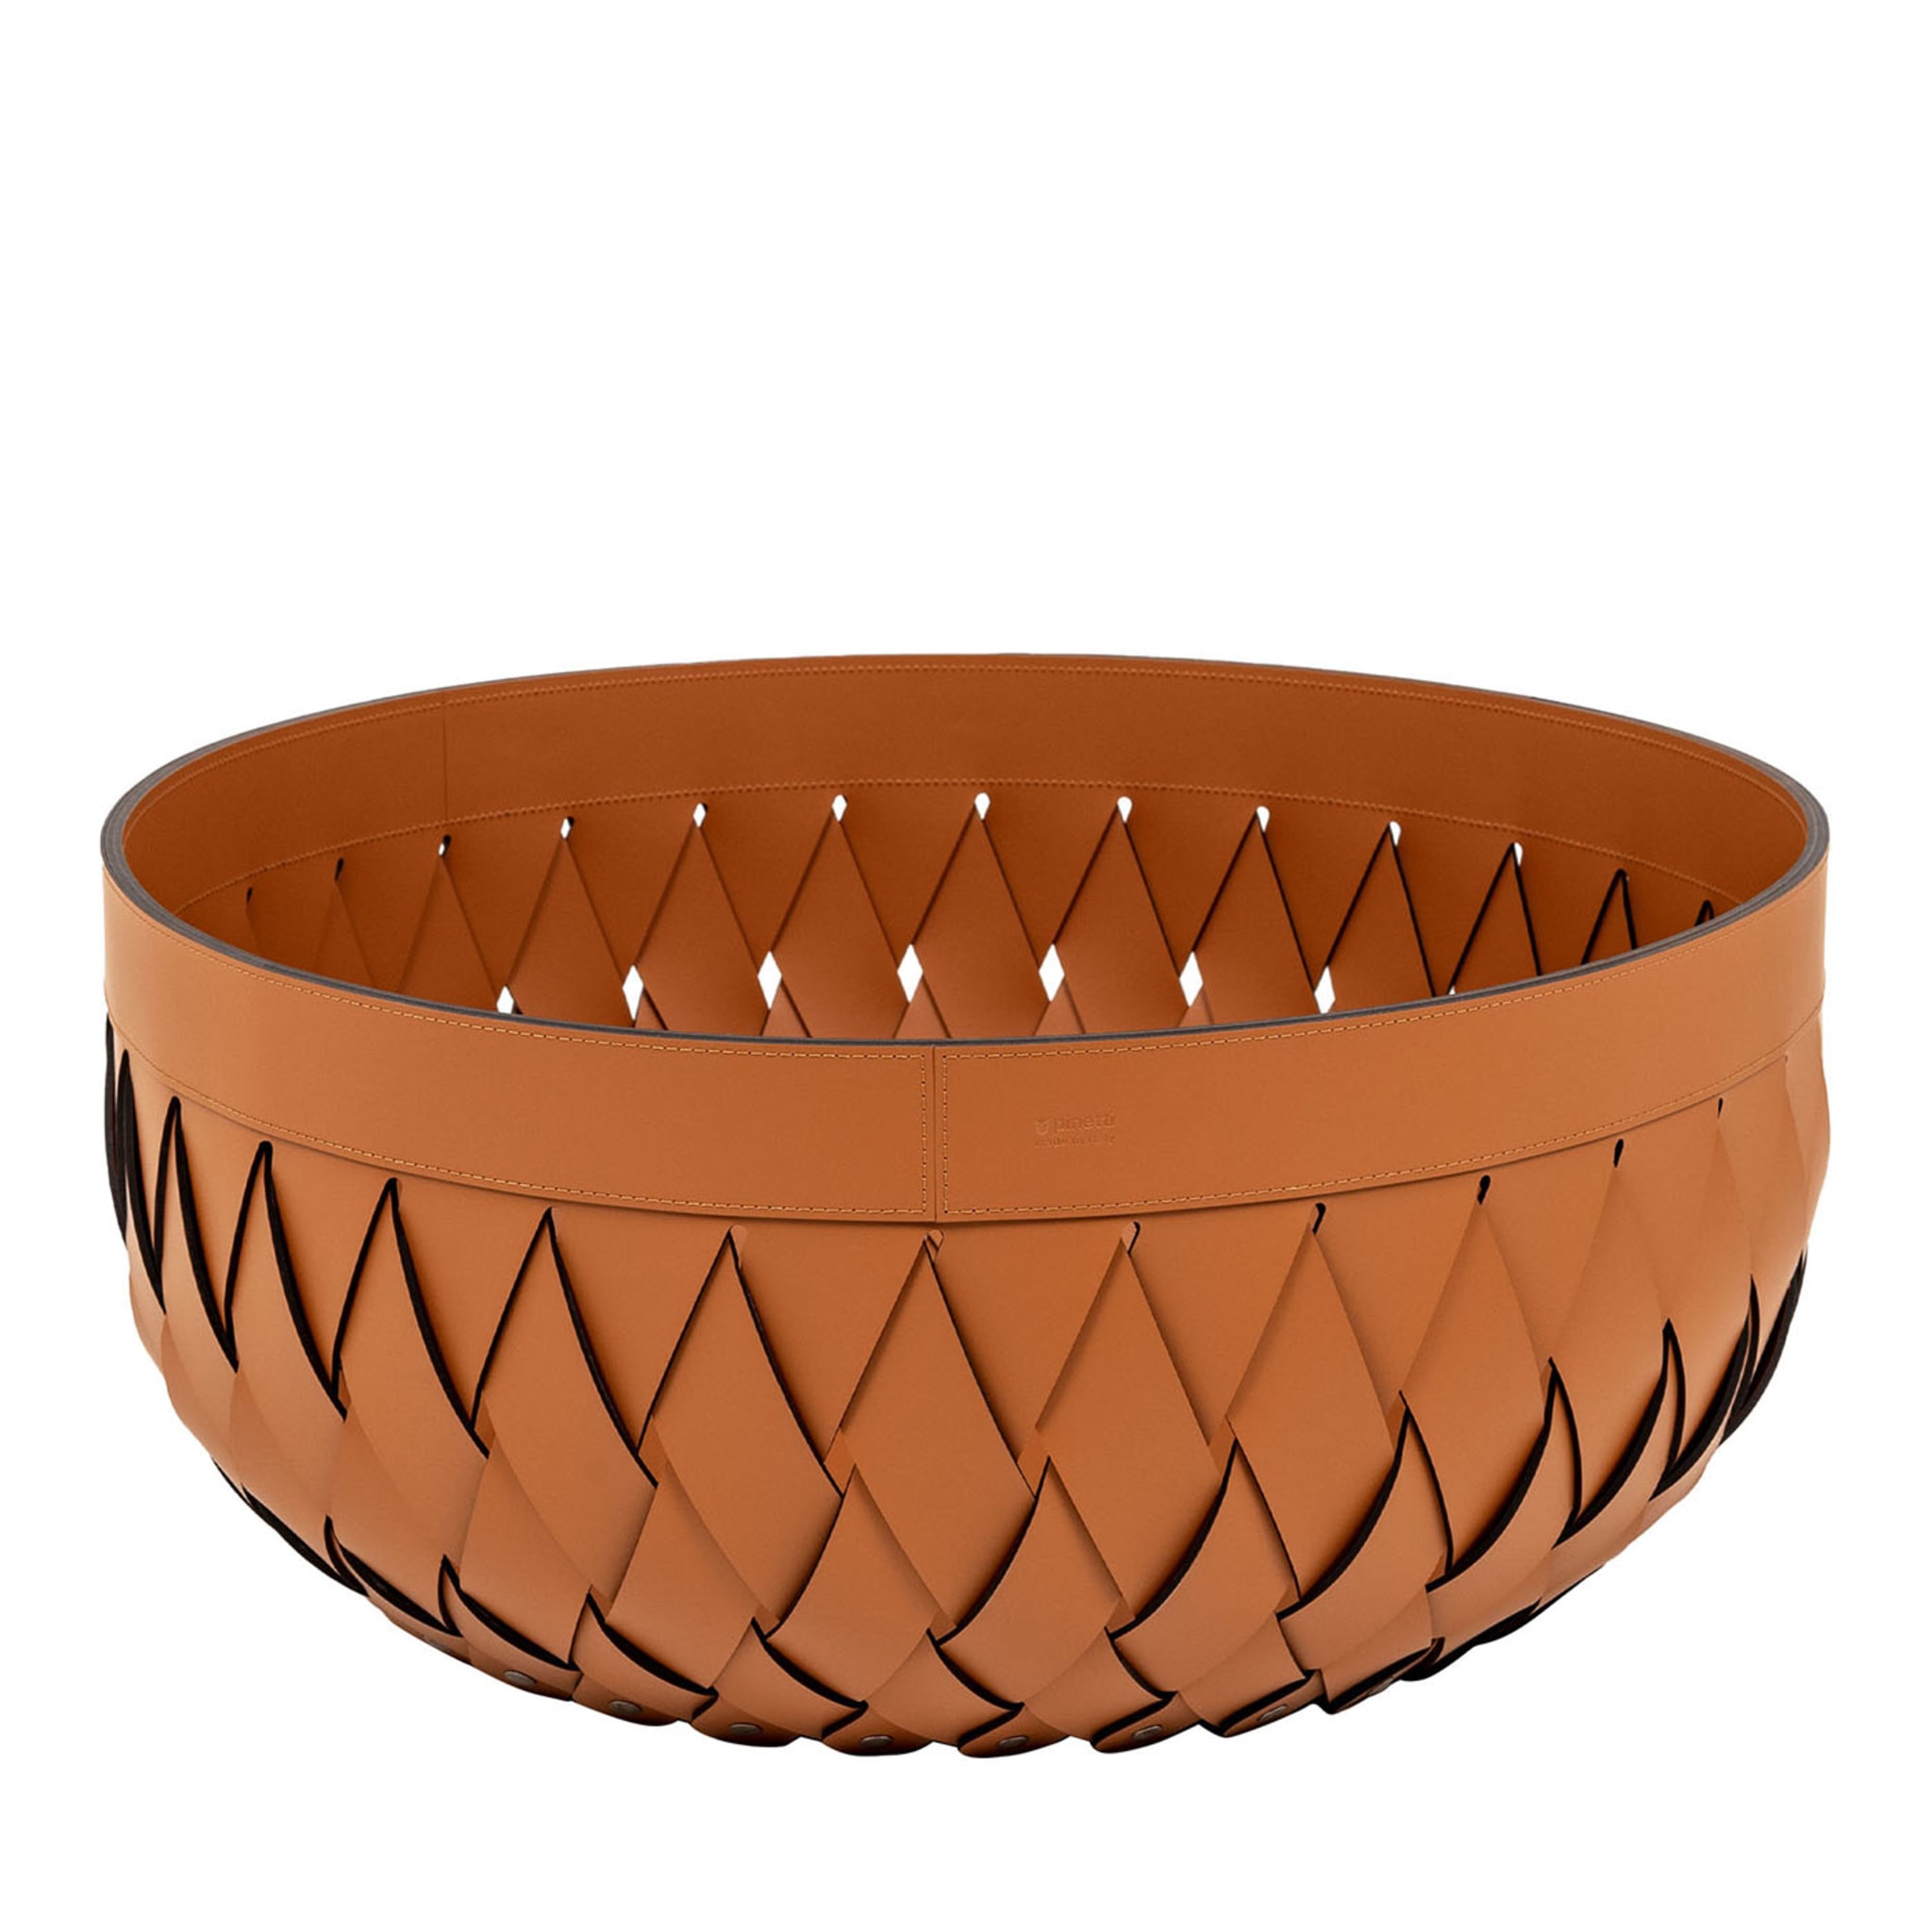 Canaria Large Braided Brown Leather Basket - Main view